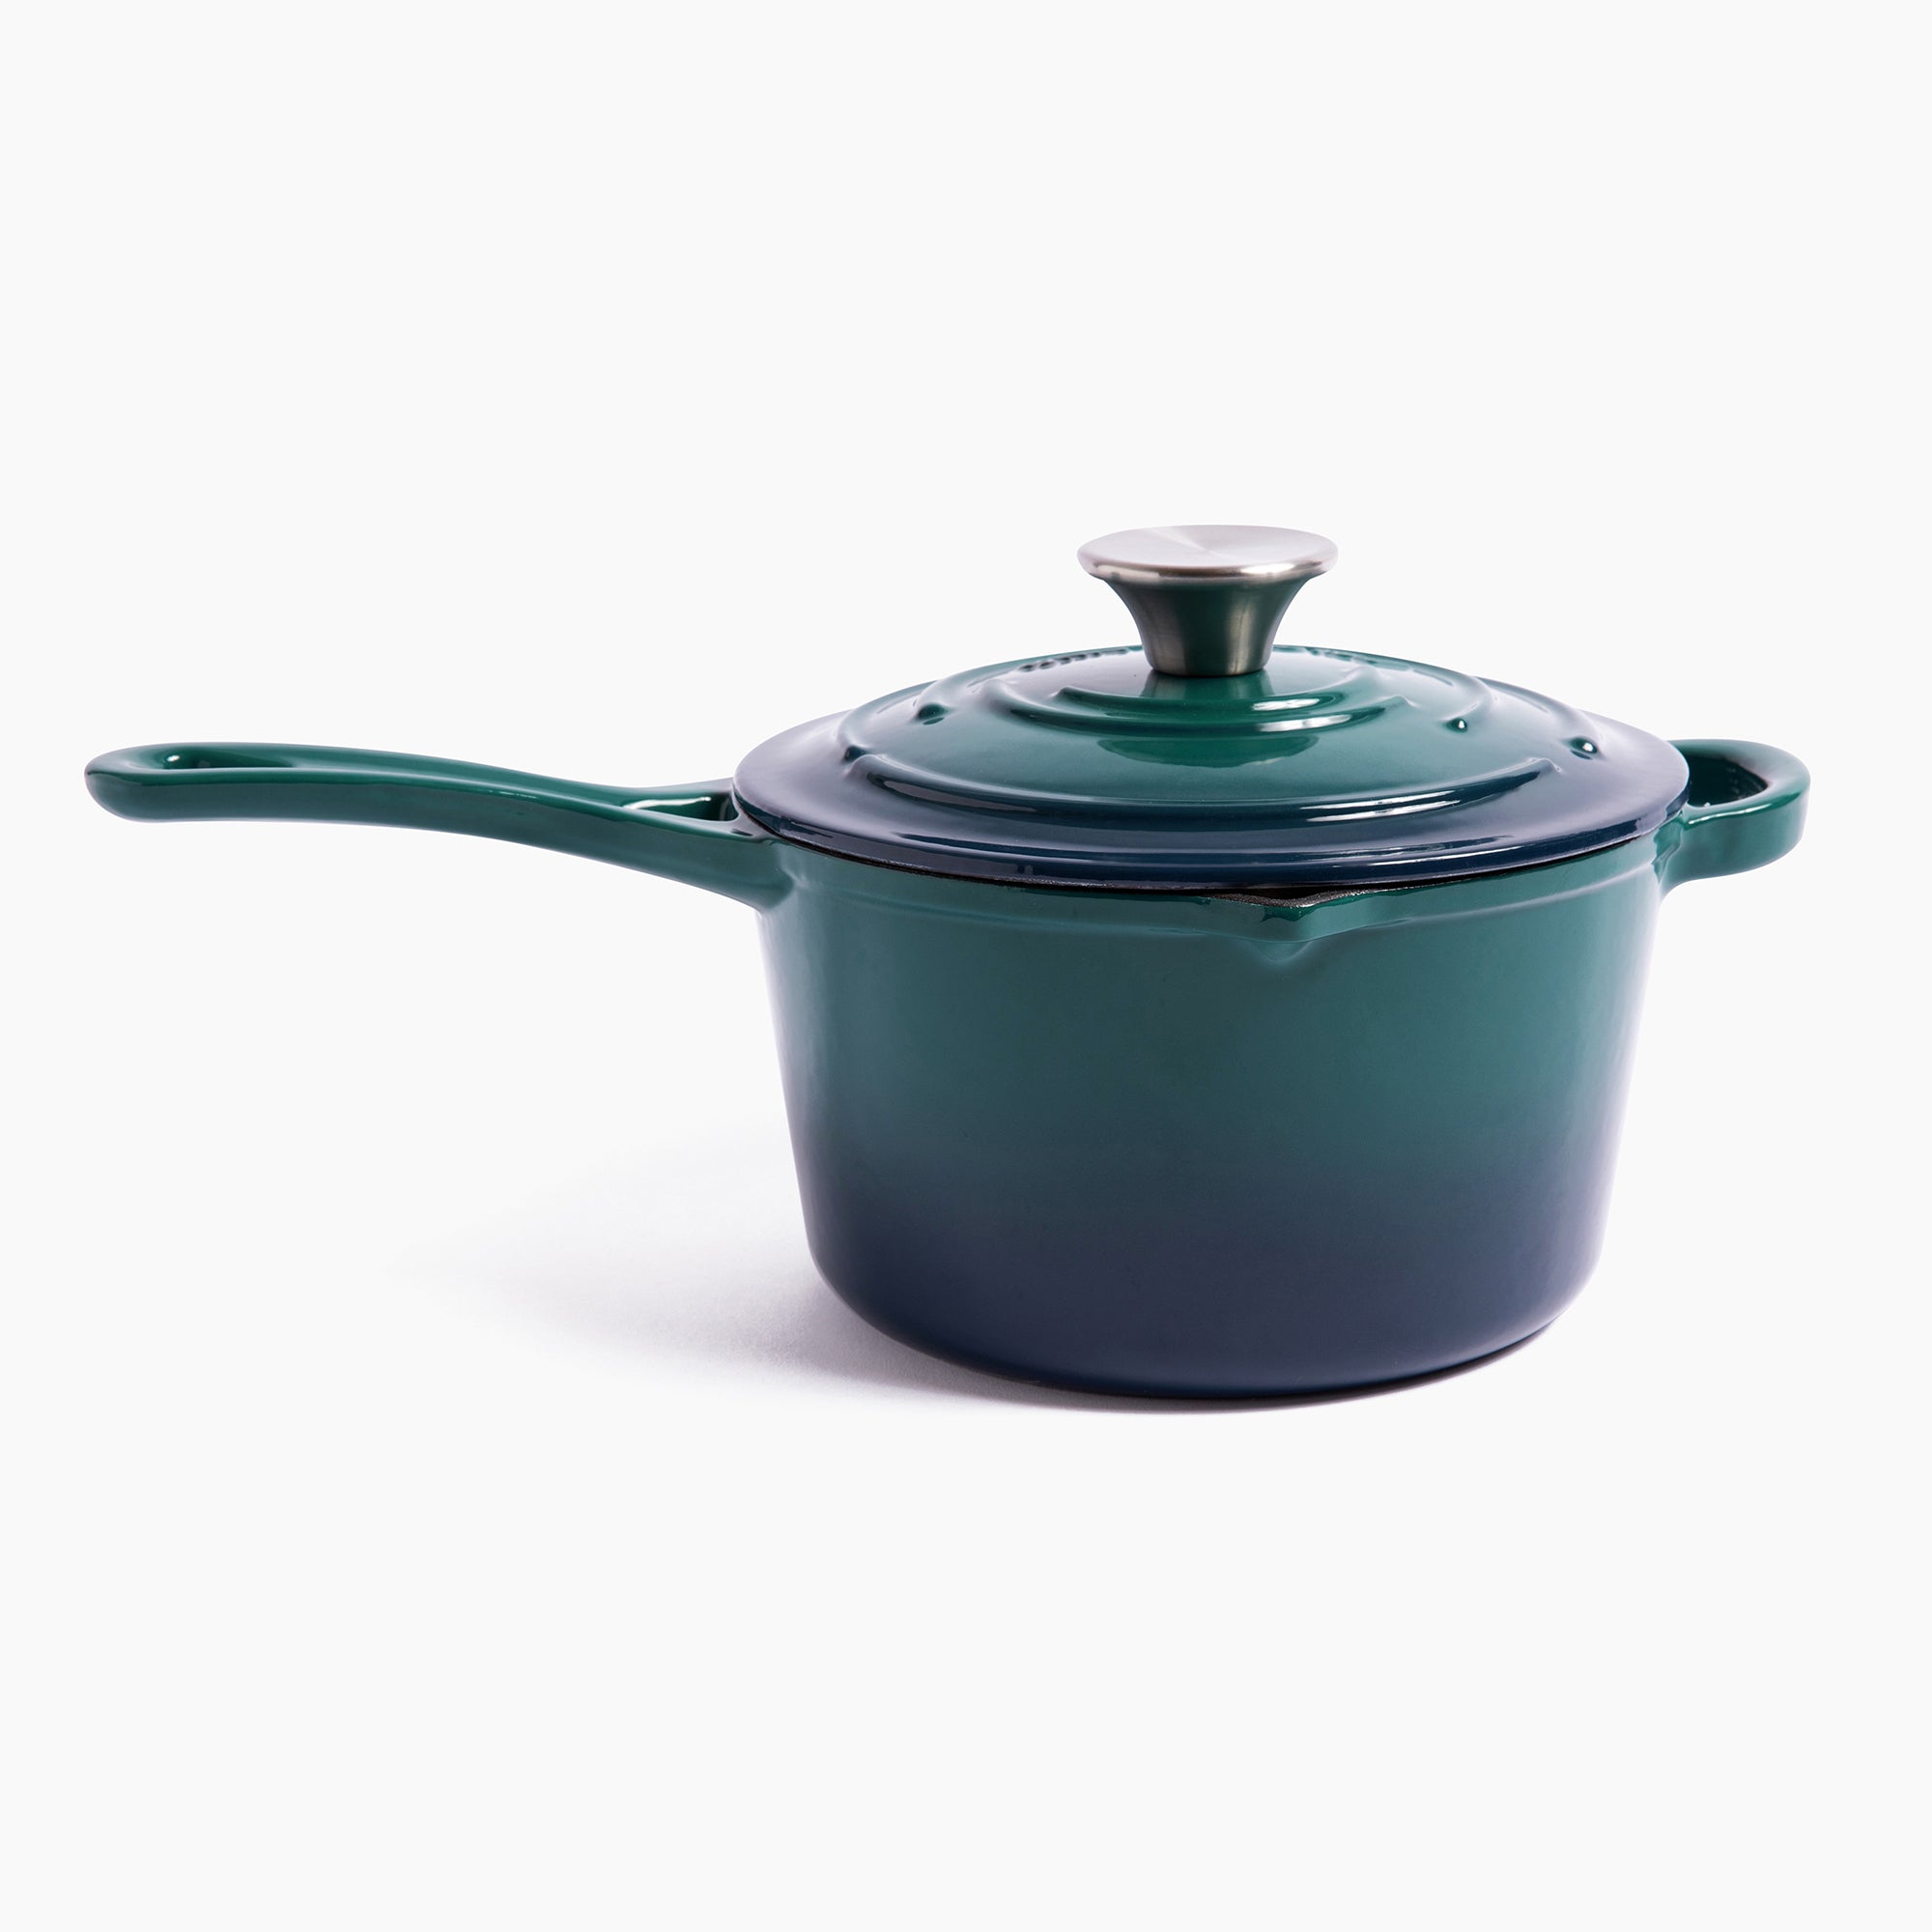 Dash of That® Enameled Cast Iron Sauce Pan - Green, 1 ct - Fry's